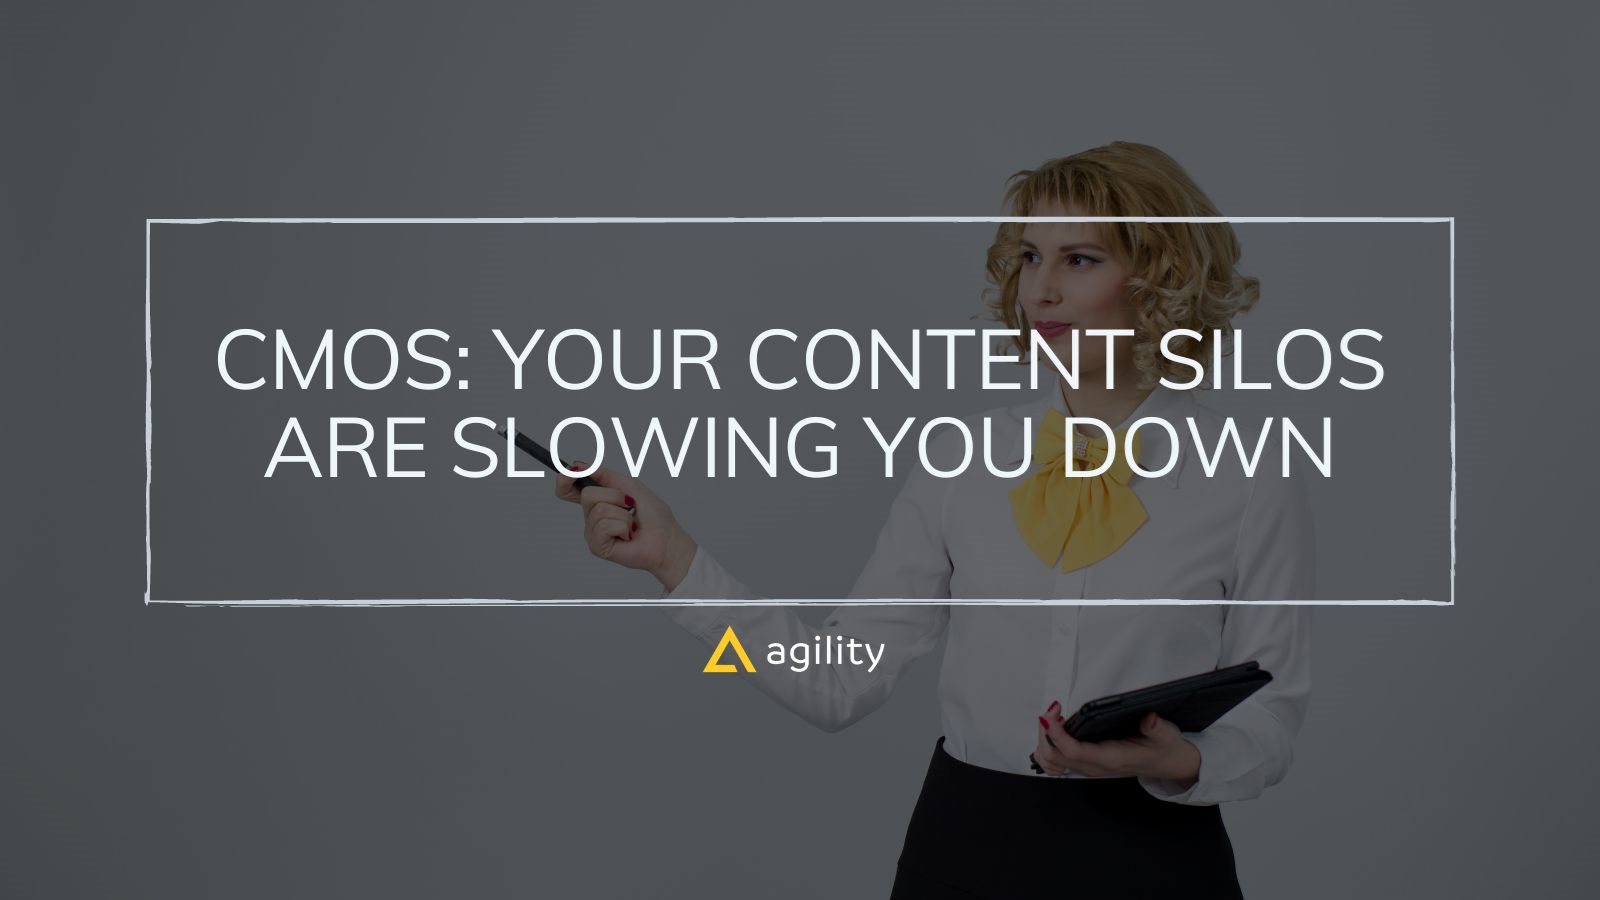 Content Silos Are Slowing You Down